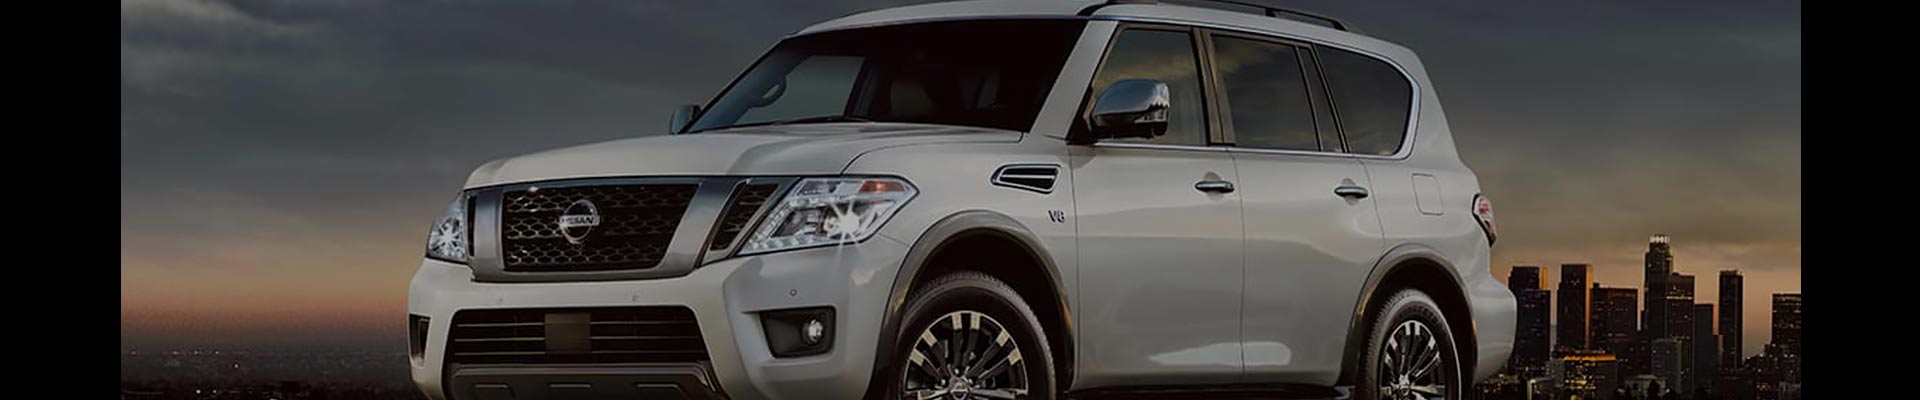 Shop Replacement and OEM 2014 Nissan Armada Parts with Discounted Price on the Net